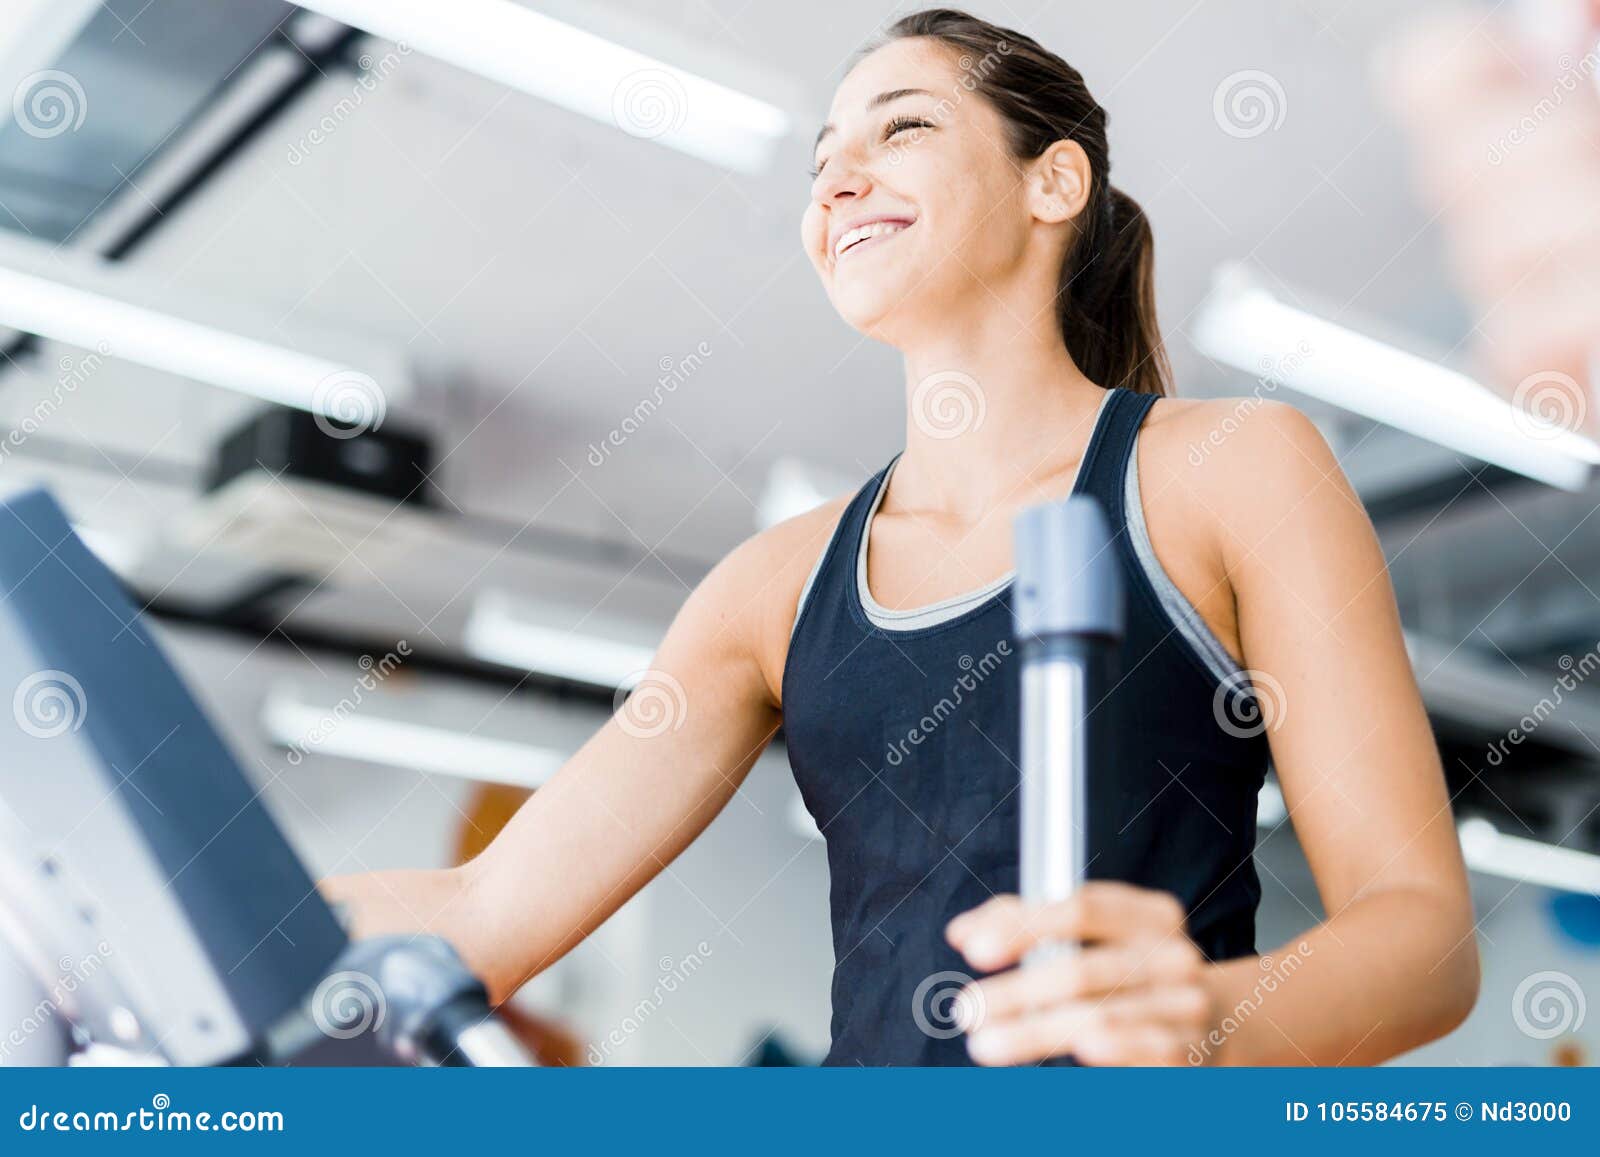 Beautiful Young Lady Using the Elliptical Trainer Stock Image - Image ...